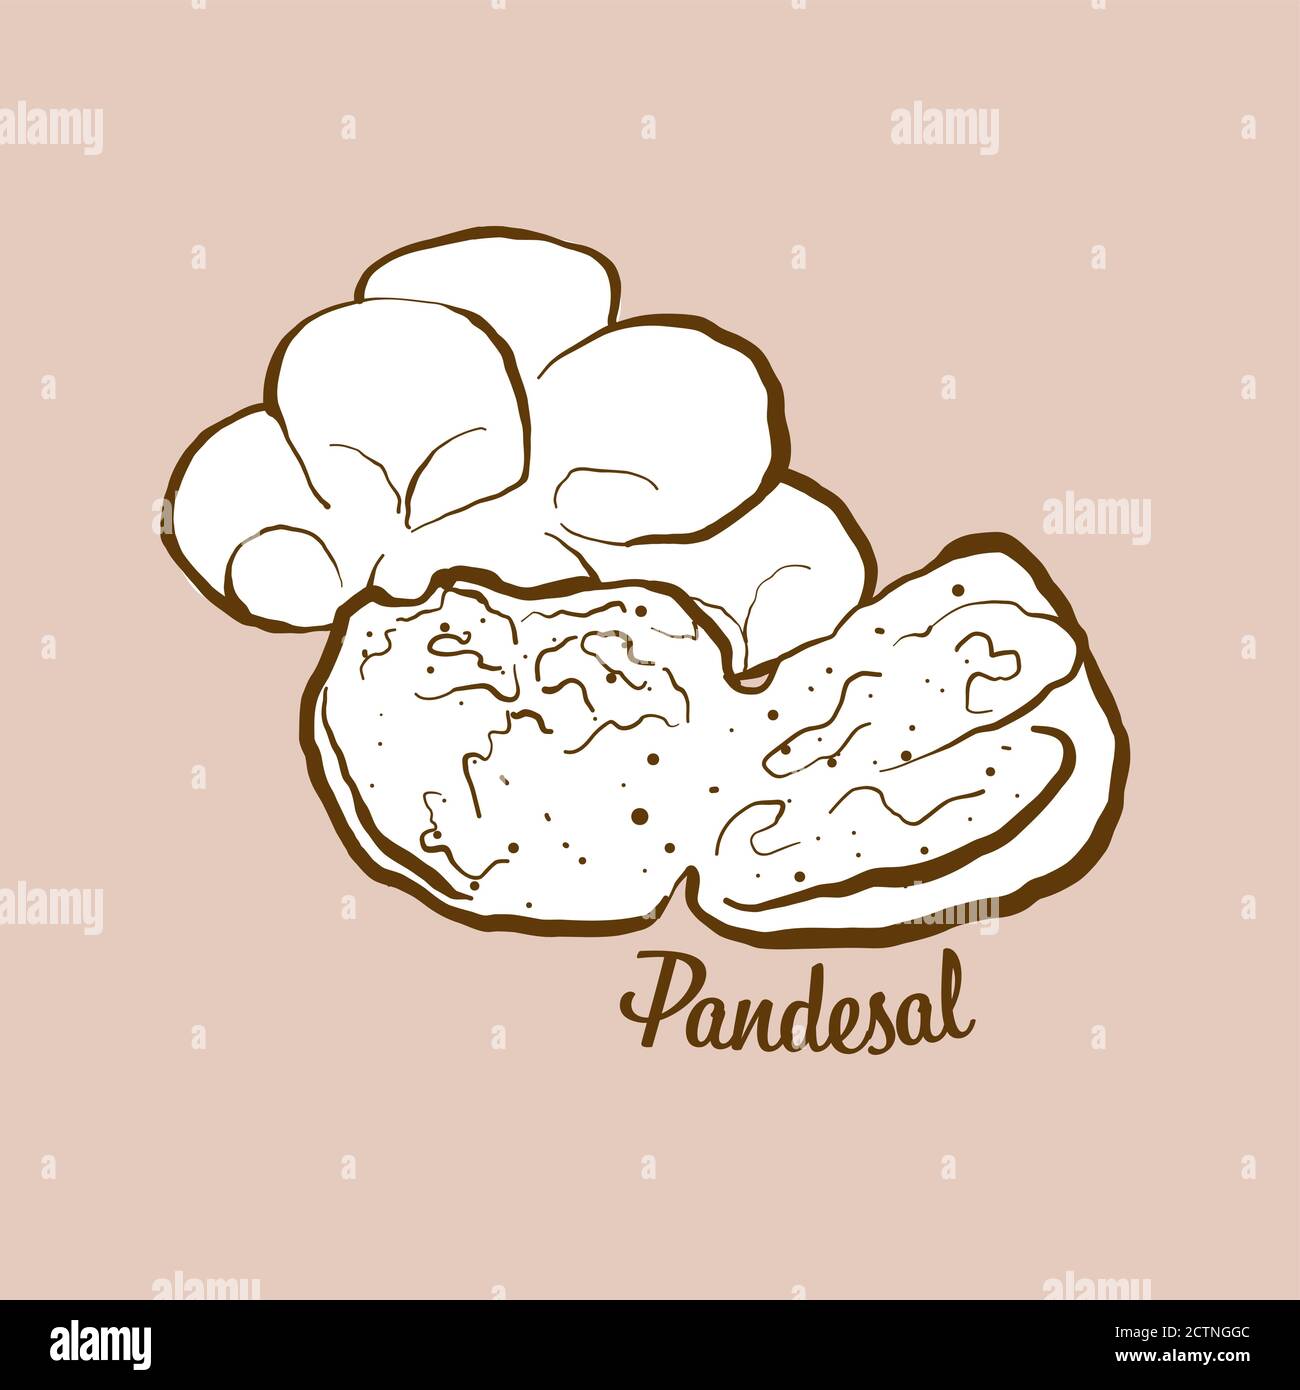 Hand-drawn Pandesal bread illustration. Sweet bread, usually known in Philippines. Vector drawing series. Stock Vector